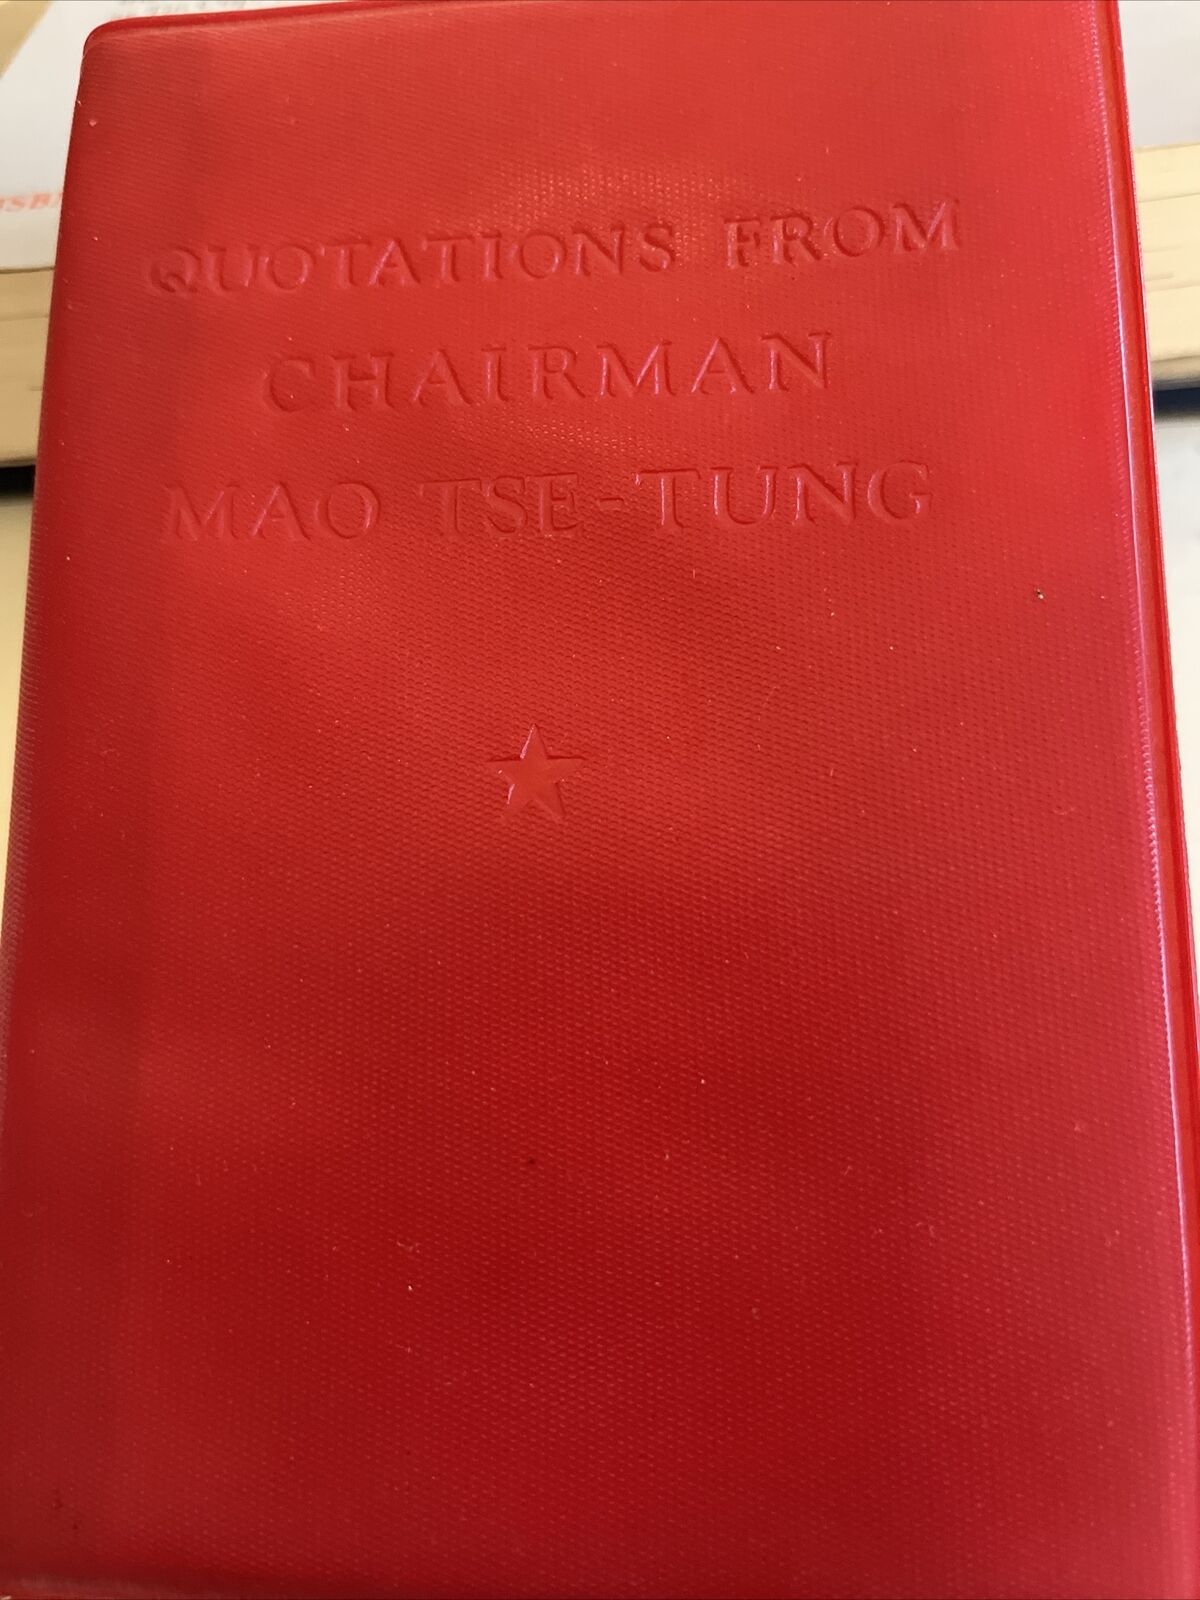 Quotations From Chairman Mao Tse-Tung 1966 First Edition VGC With Dust Jacket